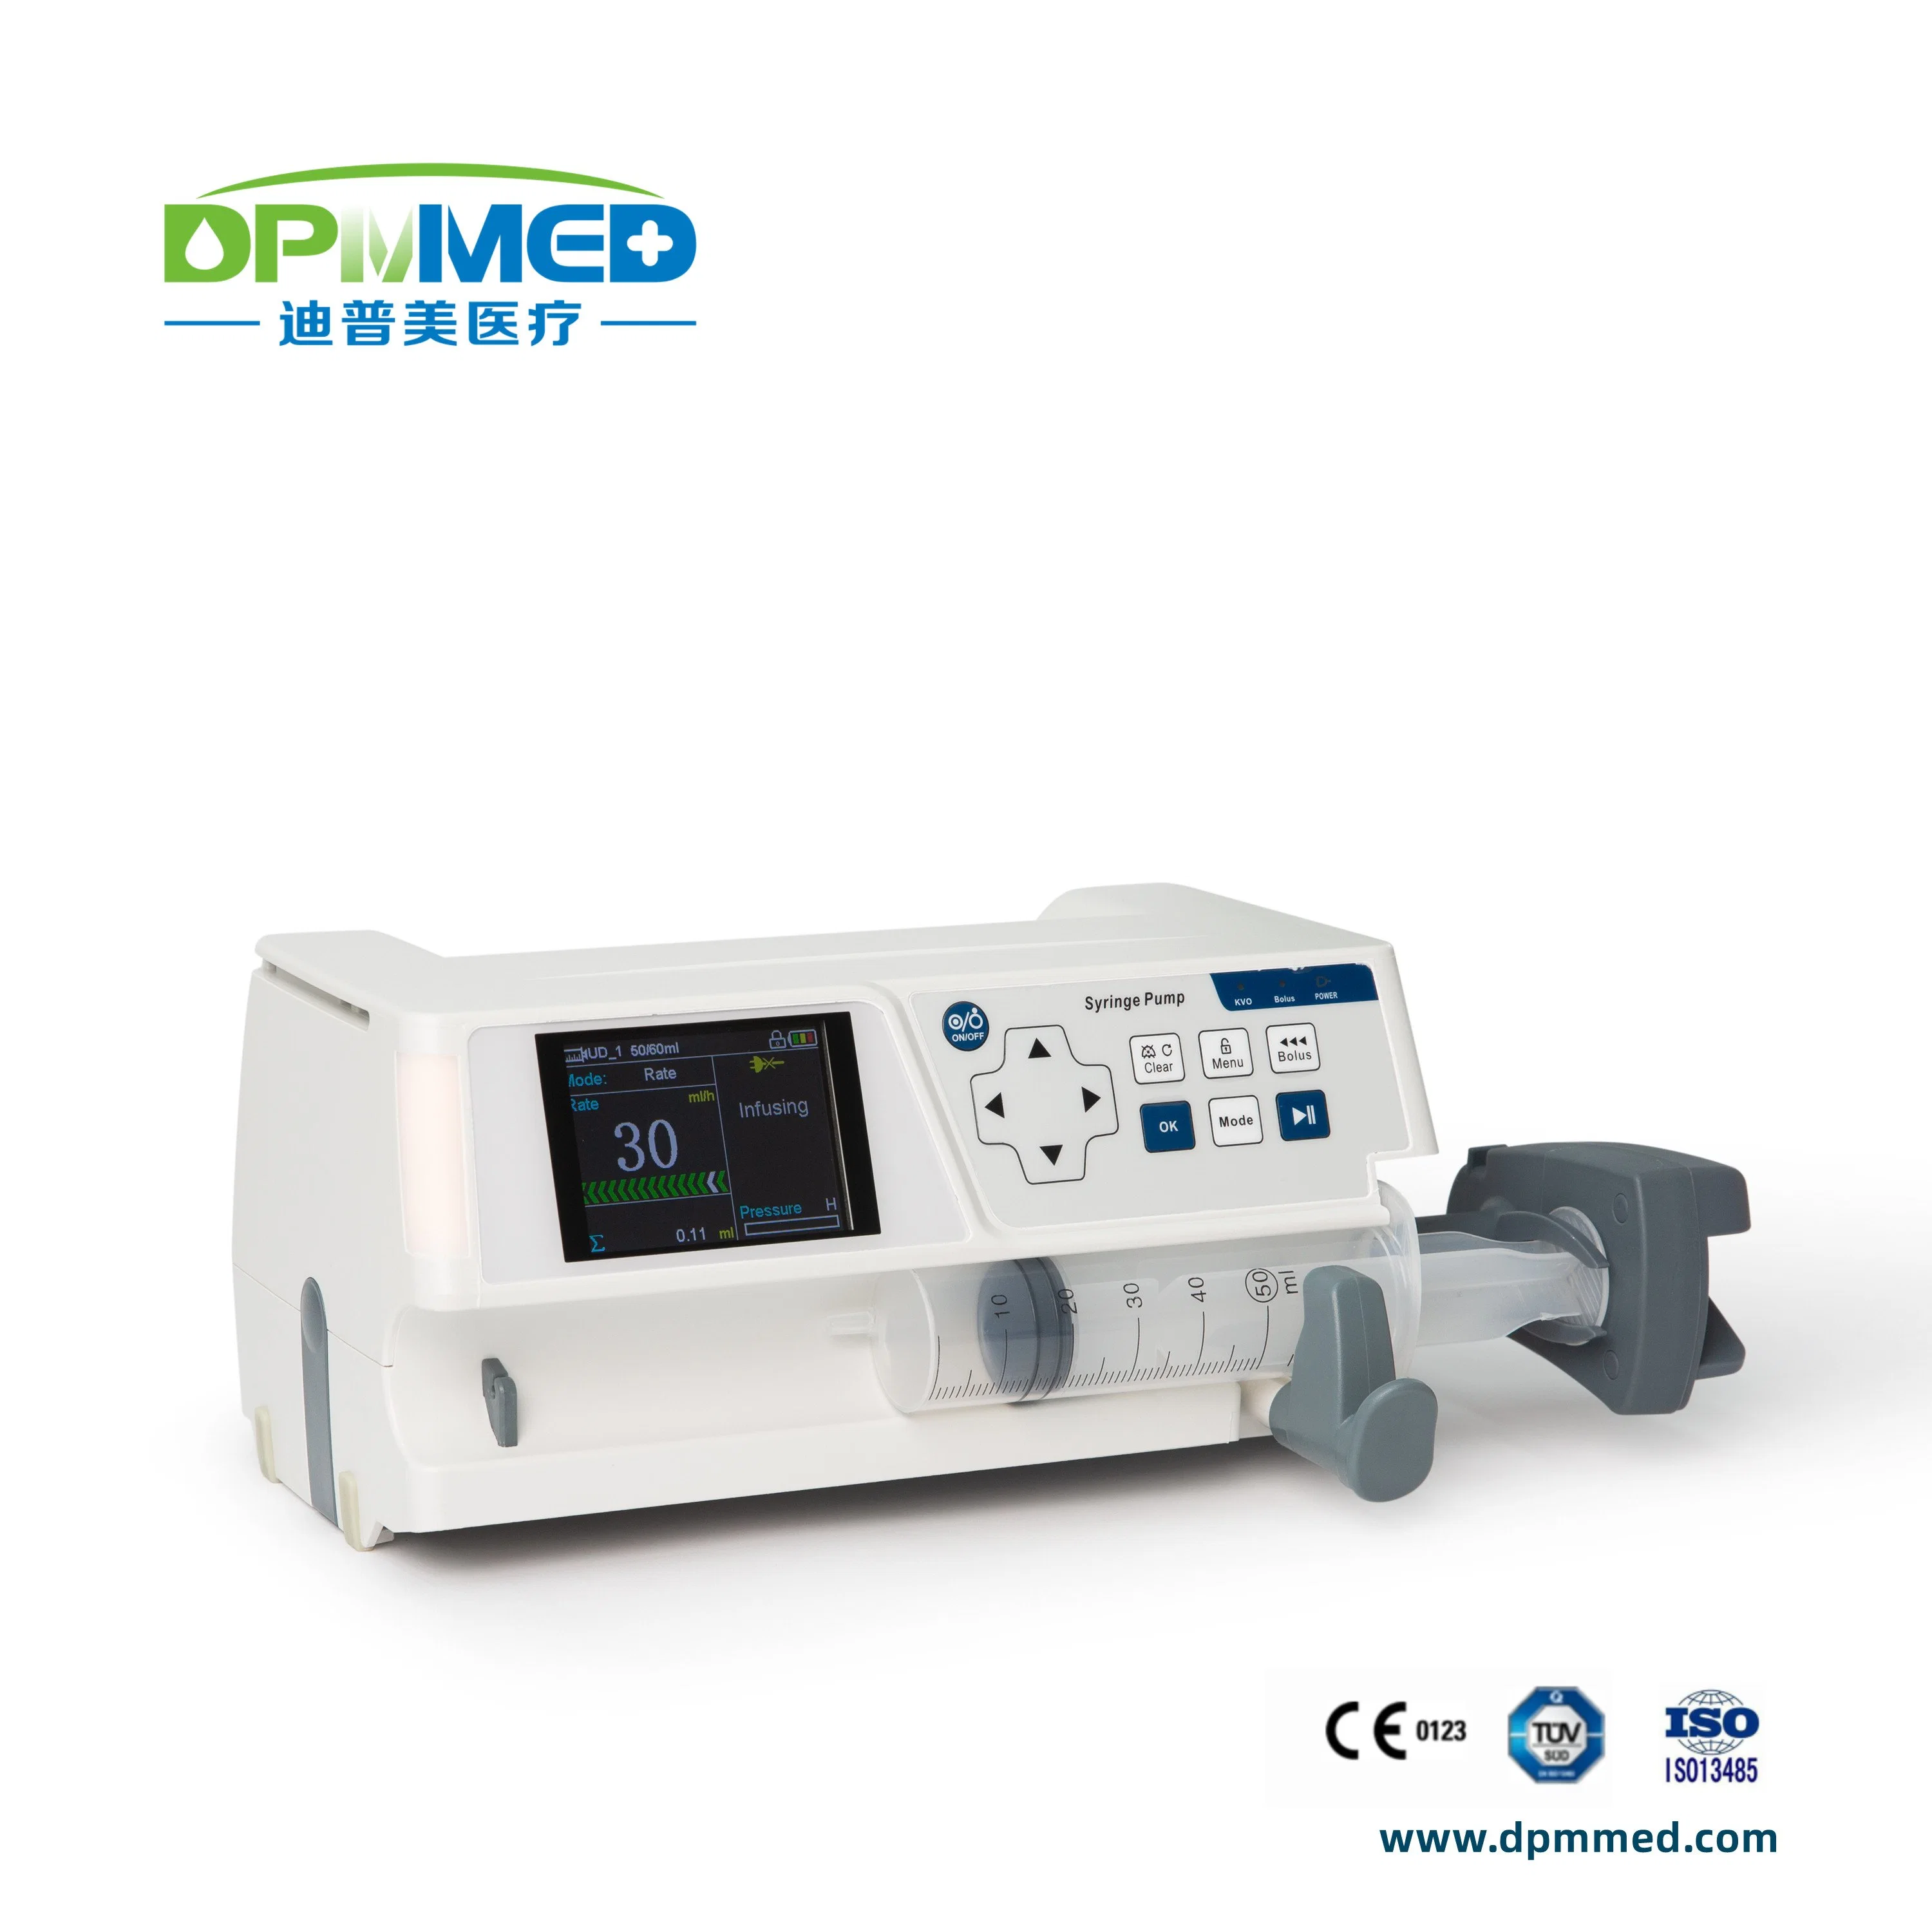 Dpmmed Medical Supply Device CE ISO Electric Syringe Pump Price Made in China for Neonatal Children Adults in Hospital